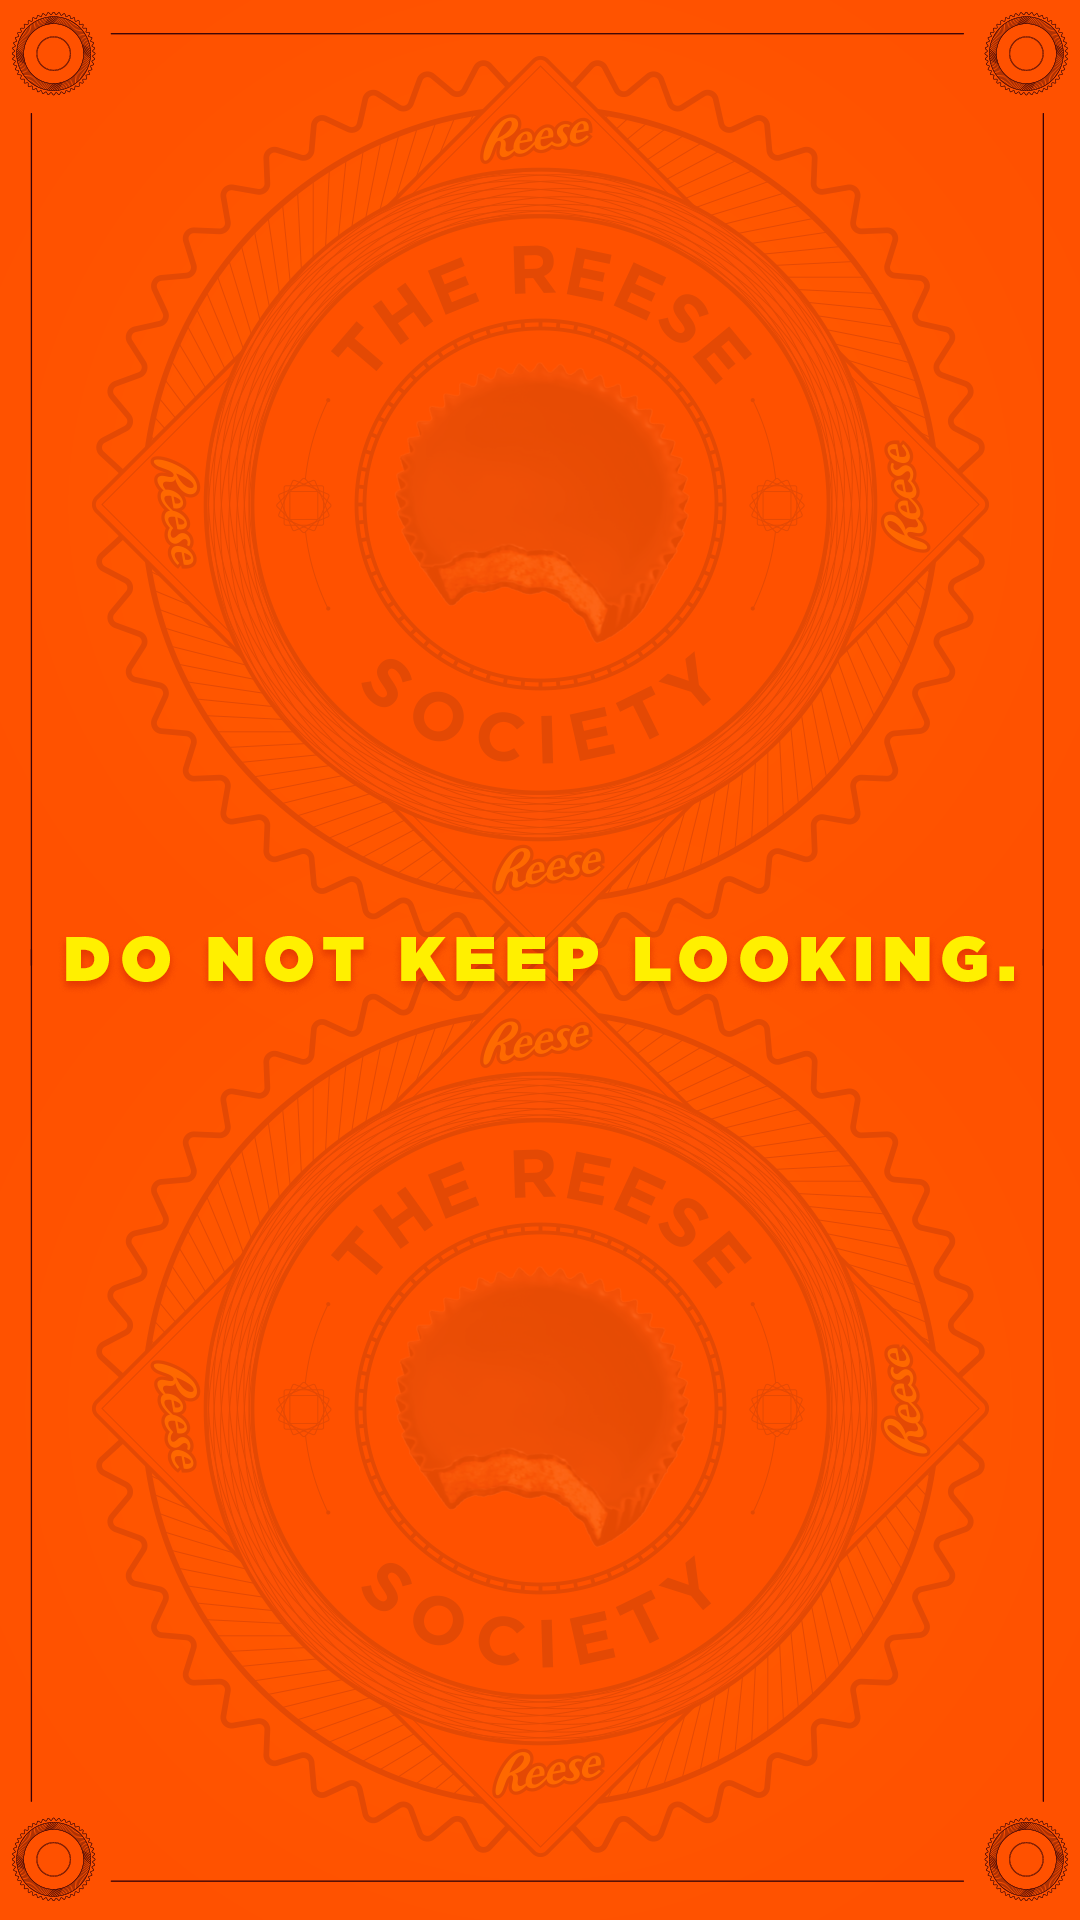 Reese-Society-IG_0063_Do-not-keep-looking.png